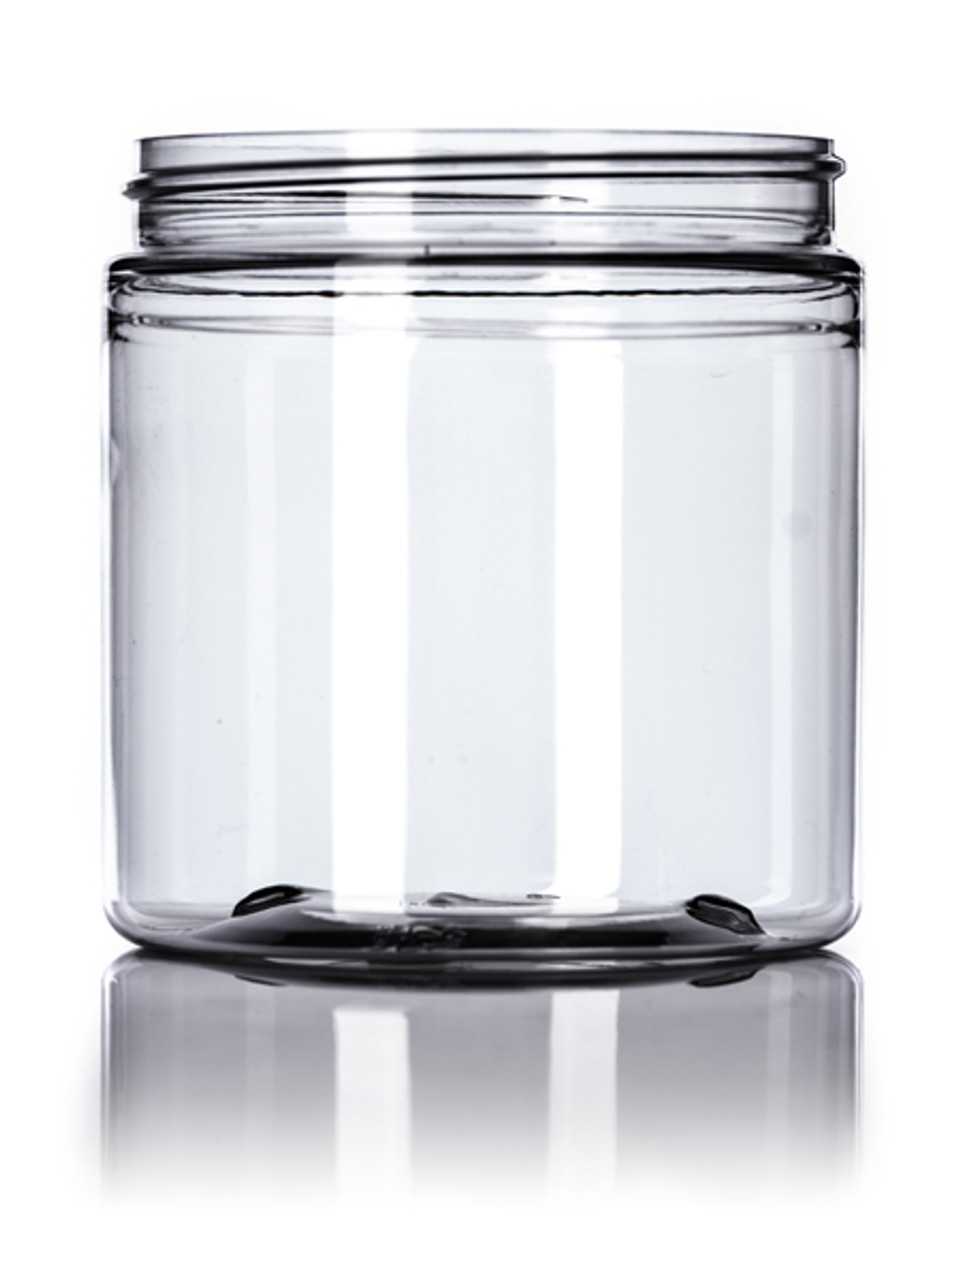 12 Pack 8 oz Round Frosted Glass Jars with Silver Metal Lids, 240ml Matte  Clear Empty Candle Jars Cosmetic Jars Food Storage Containers, Canning Jars  For Spice,Powder,Liquid,Sample,Face Cream Lotion